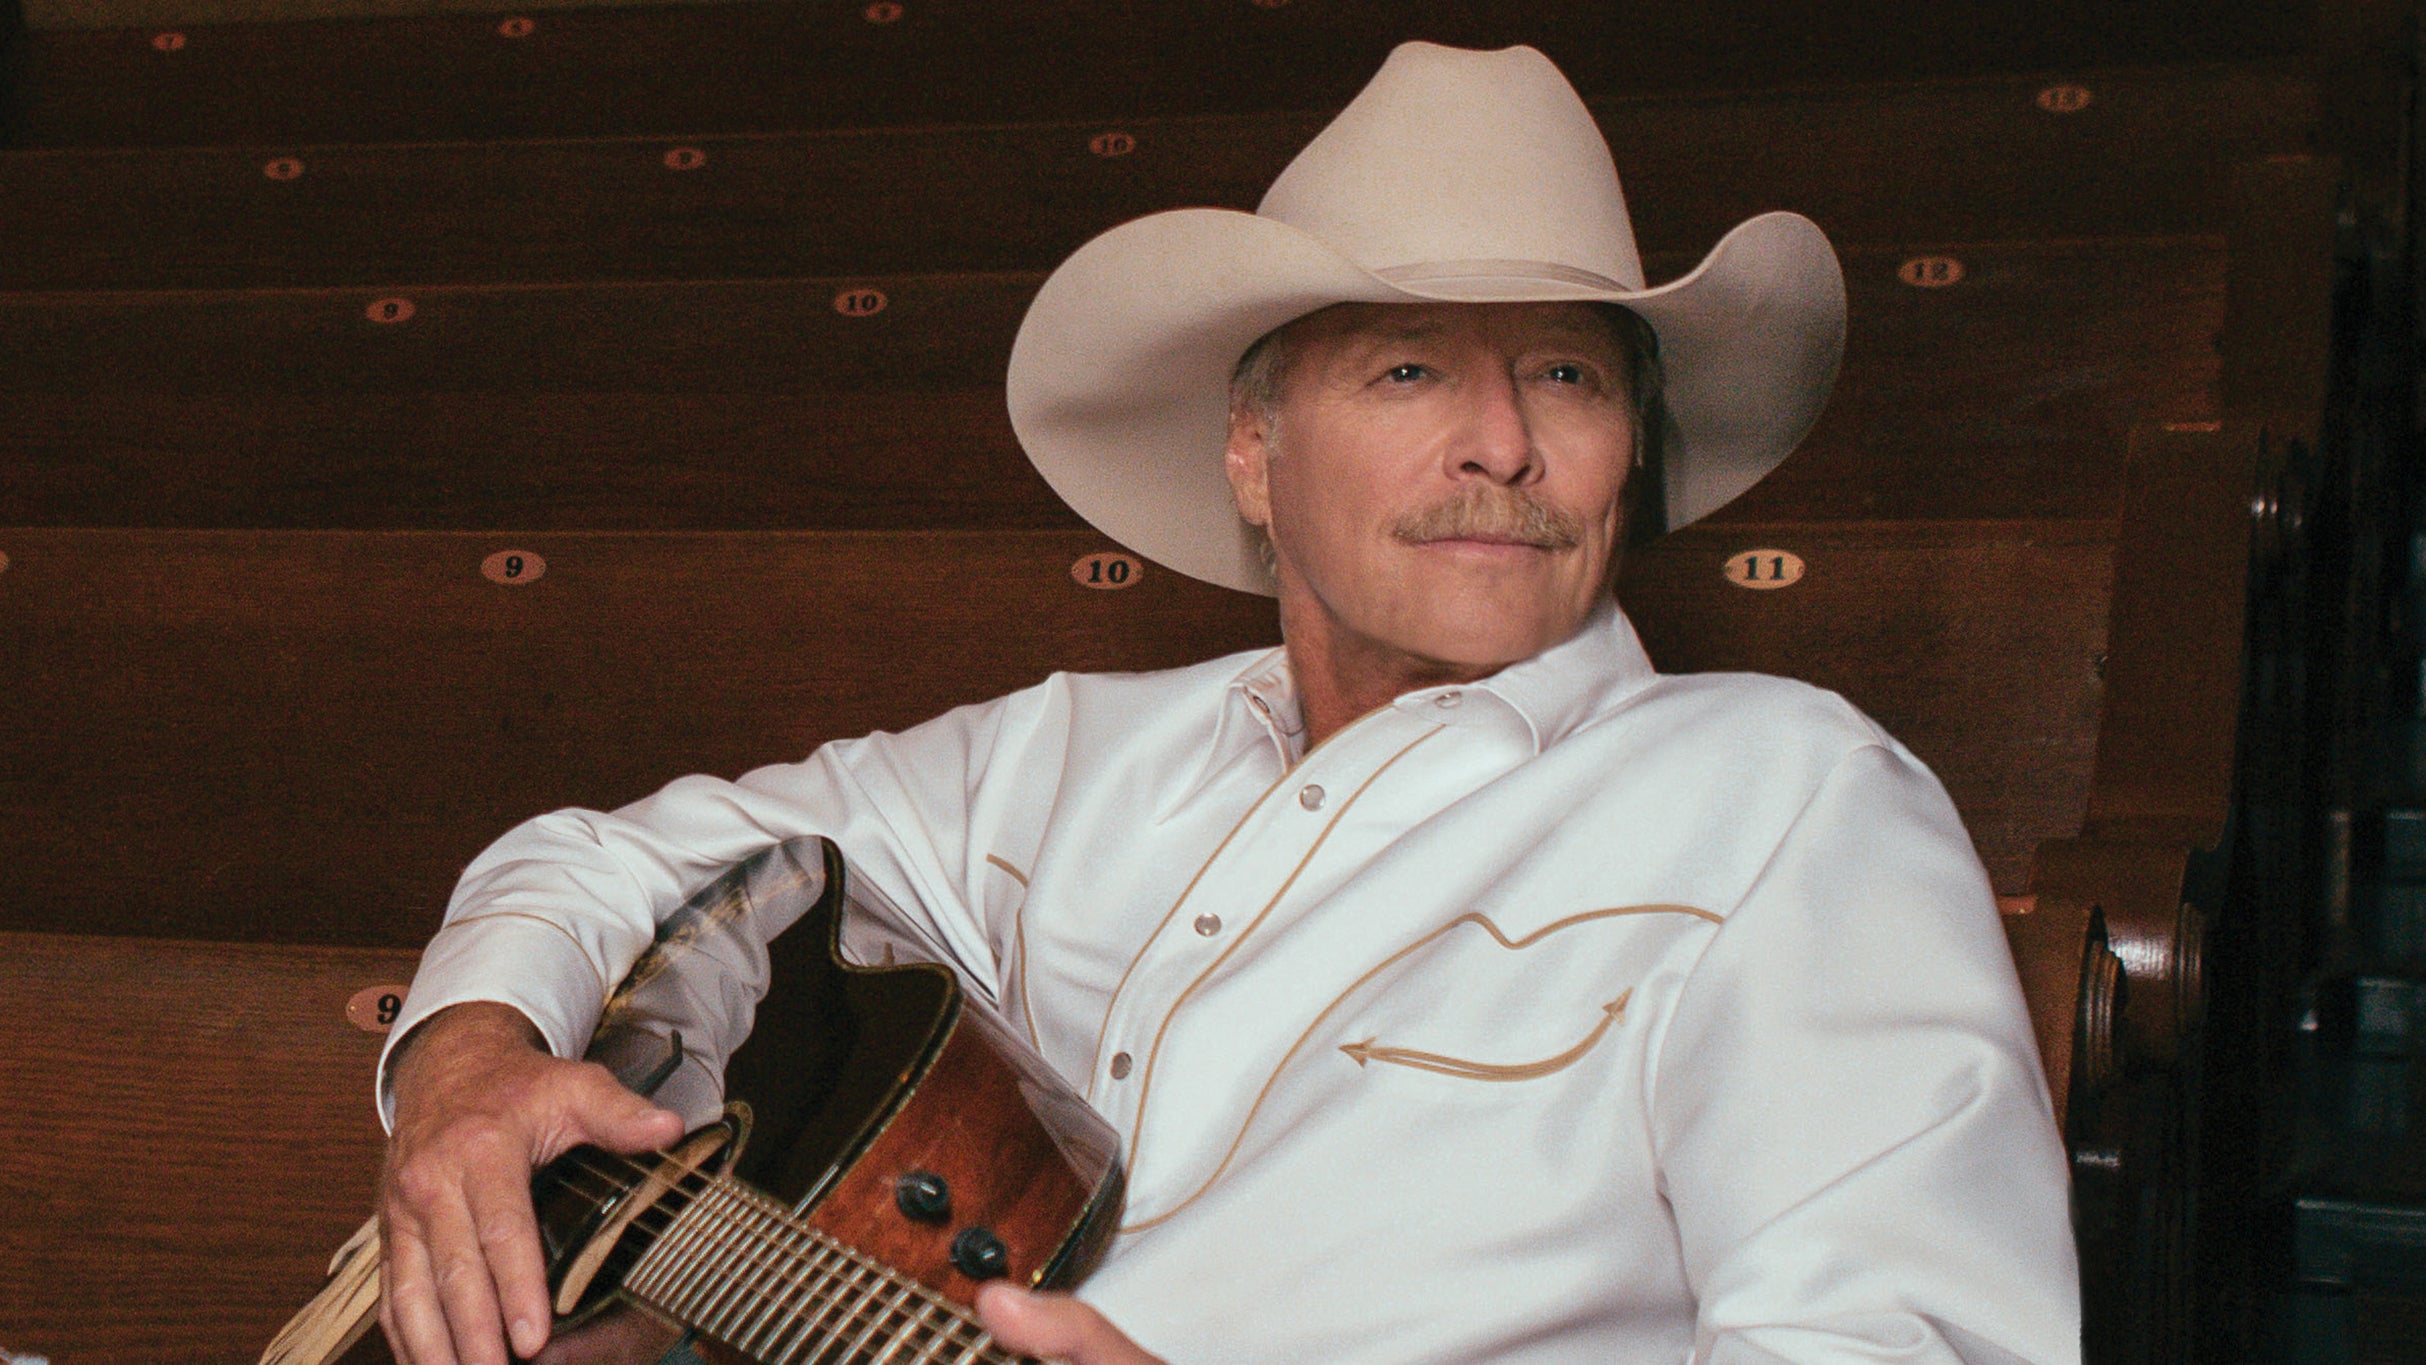 Alan Jackson - Last Call: One More For The Road in Kansas City promo photo for Alan Jackson Mobile Club presale offer code